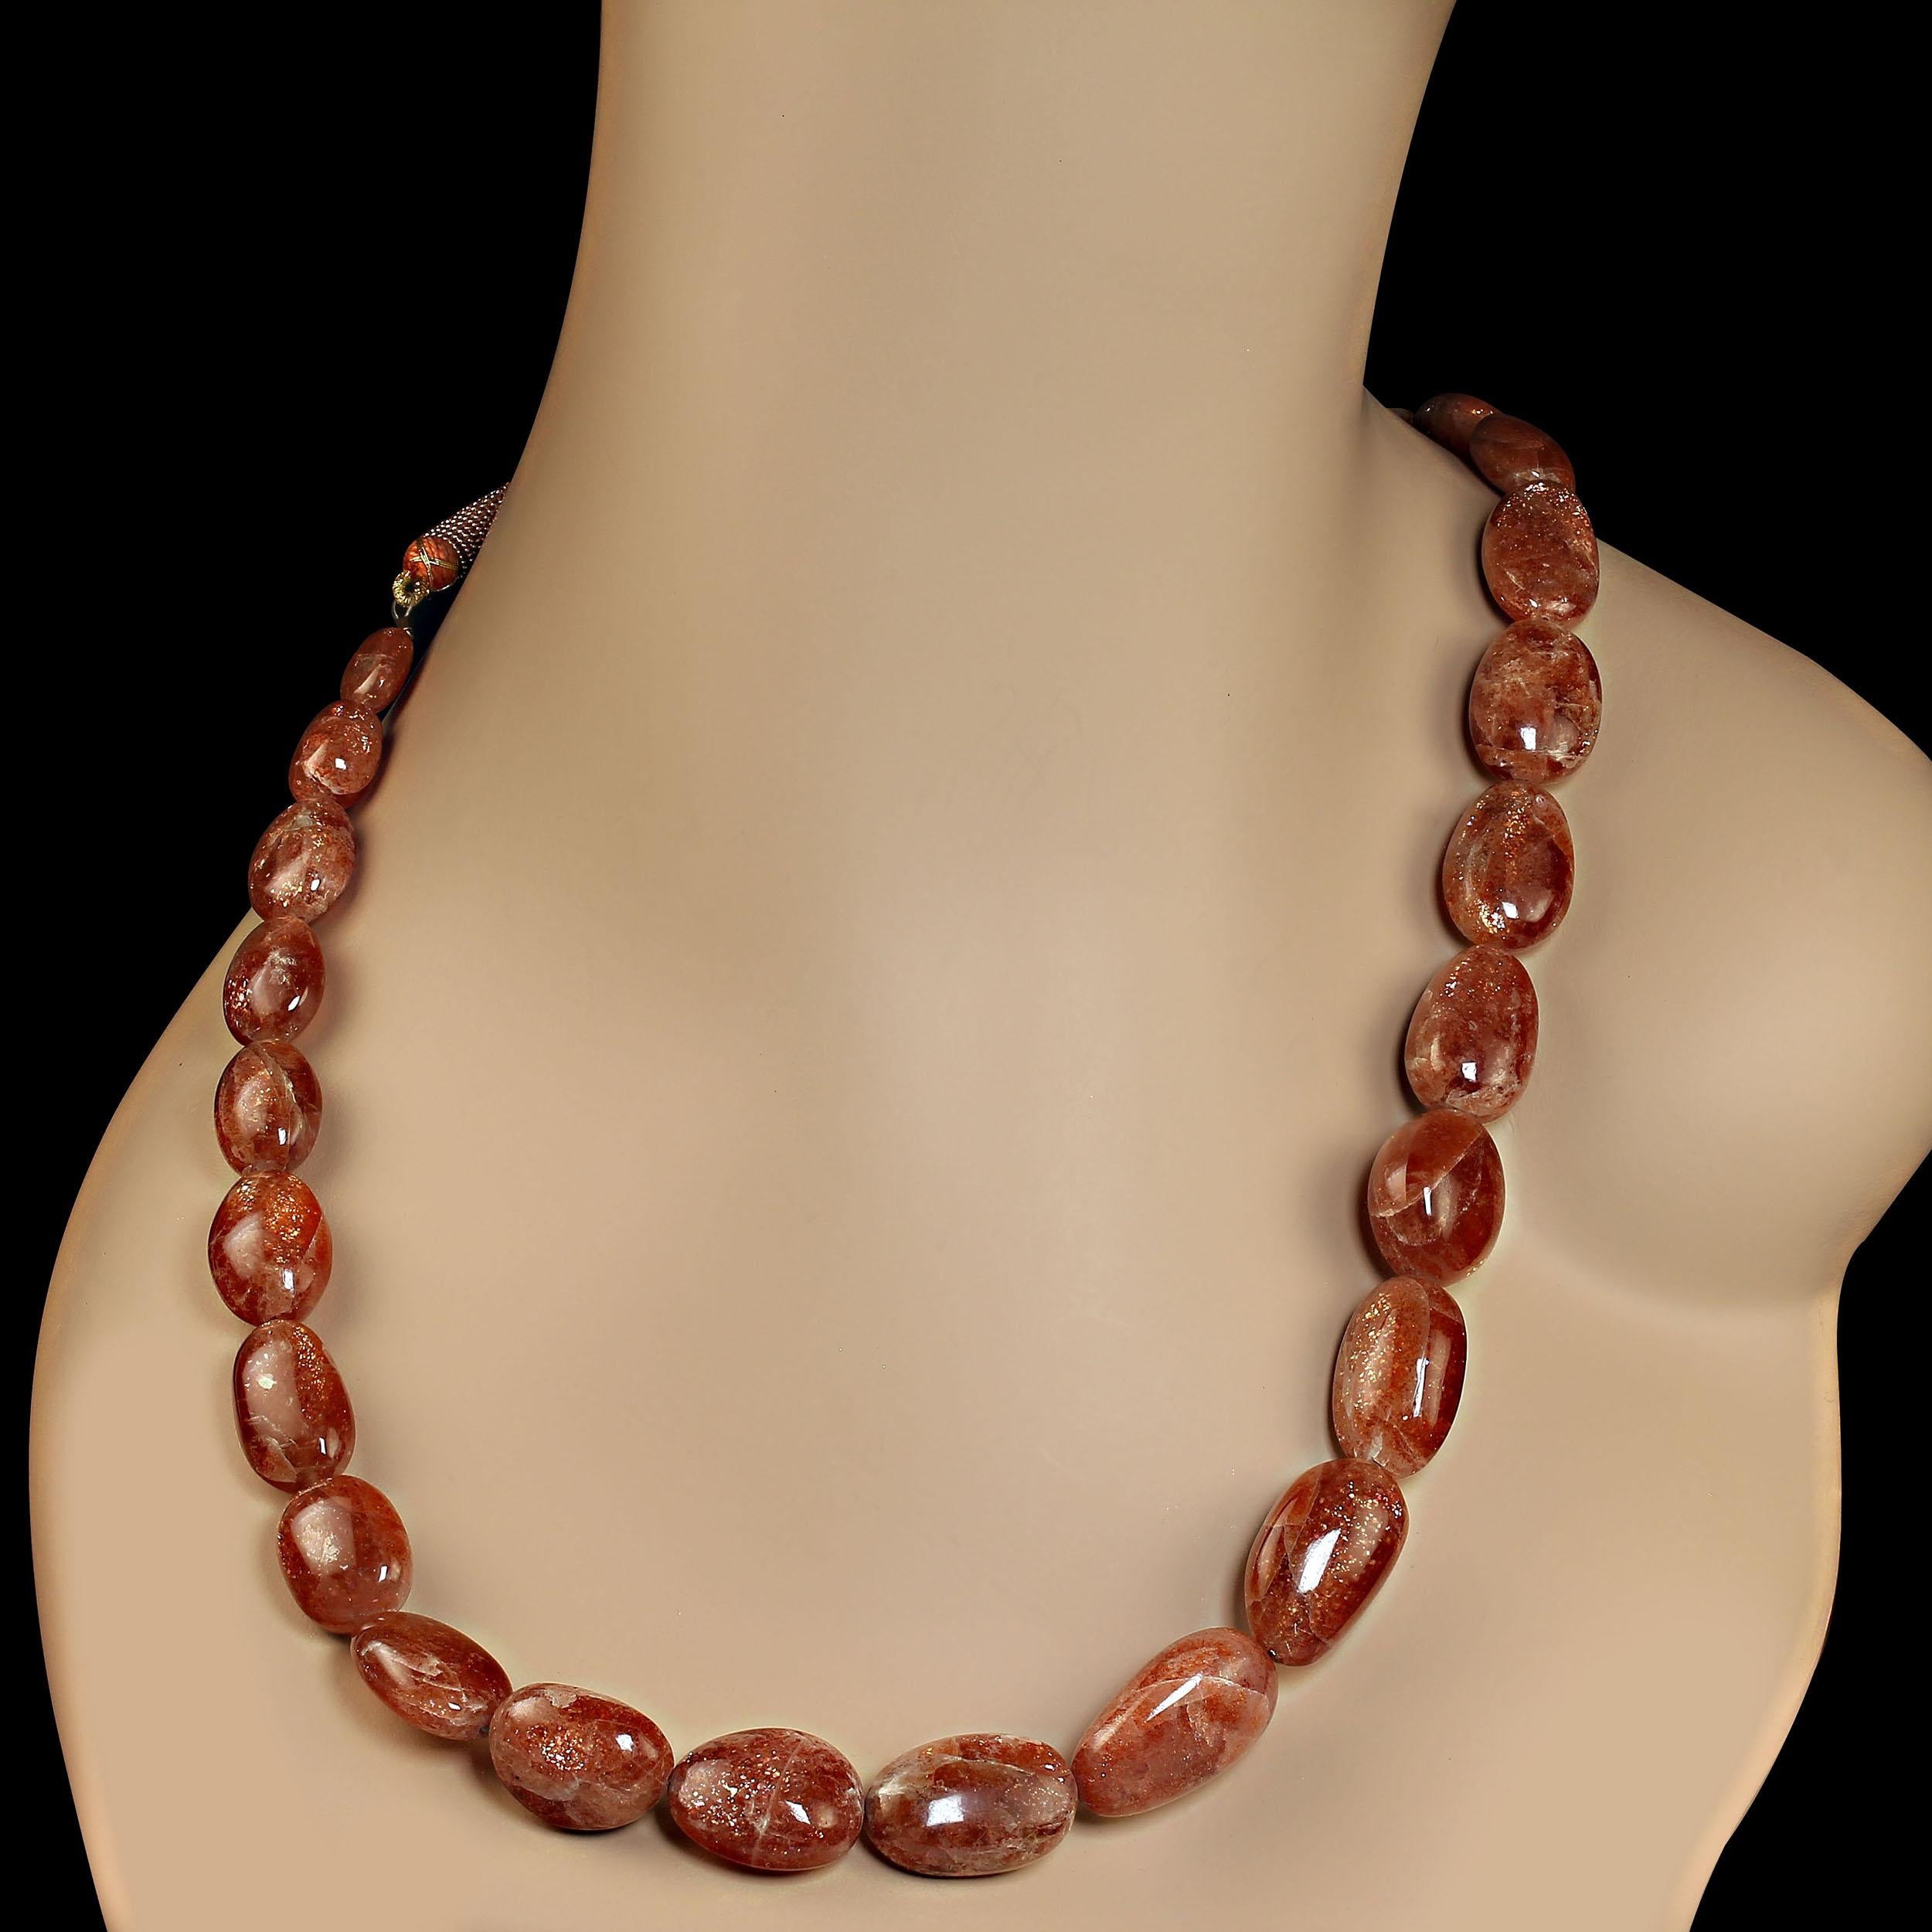 Glorious African sunstone necklace that sparkles and dances in the light. The expandable necklace has 21 inches of graduated, 12 to 25MM, gemstones and then a decorative expandable cord to slide the necklace over your head.  MN2330